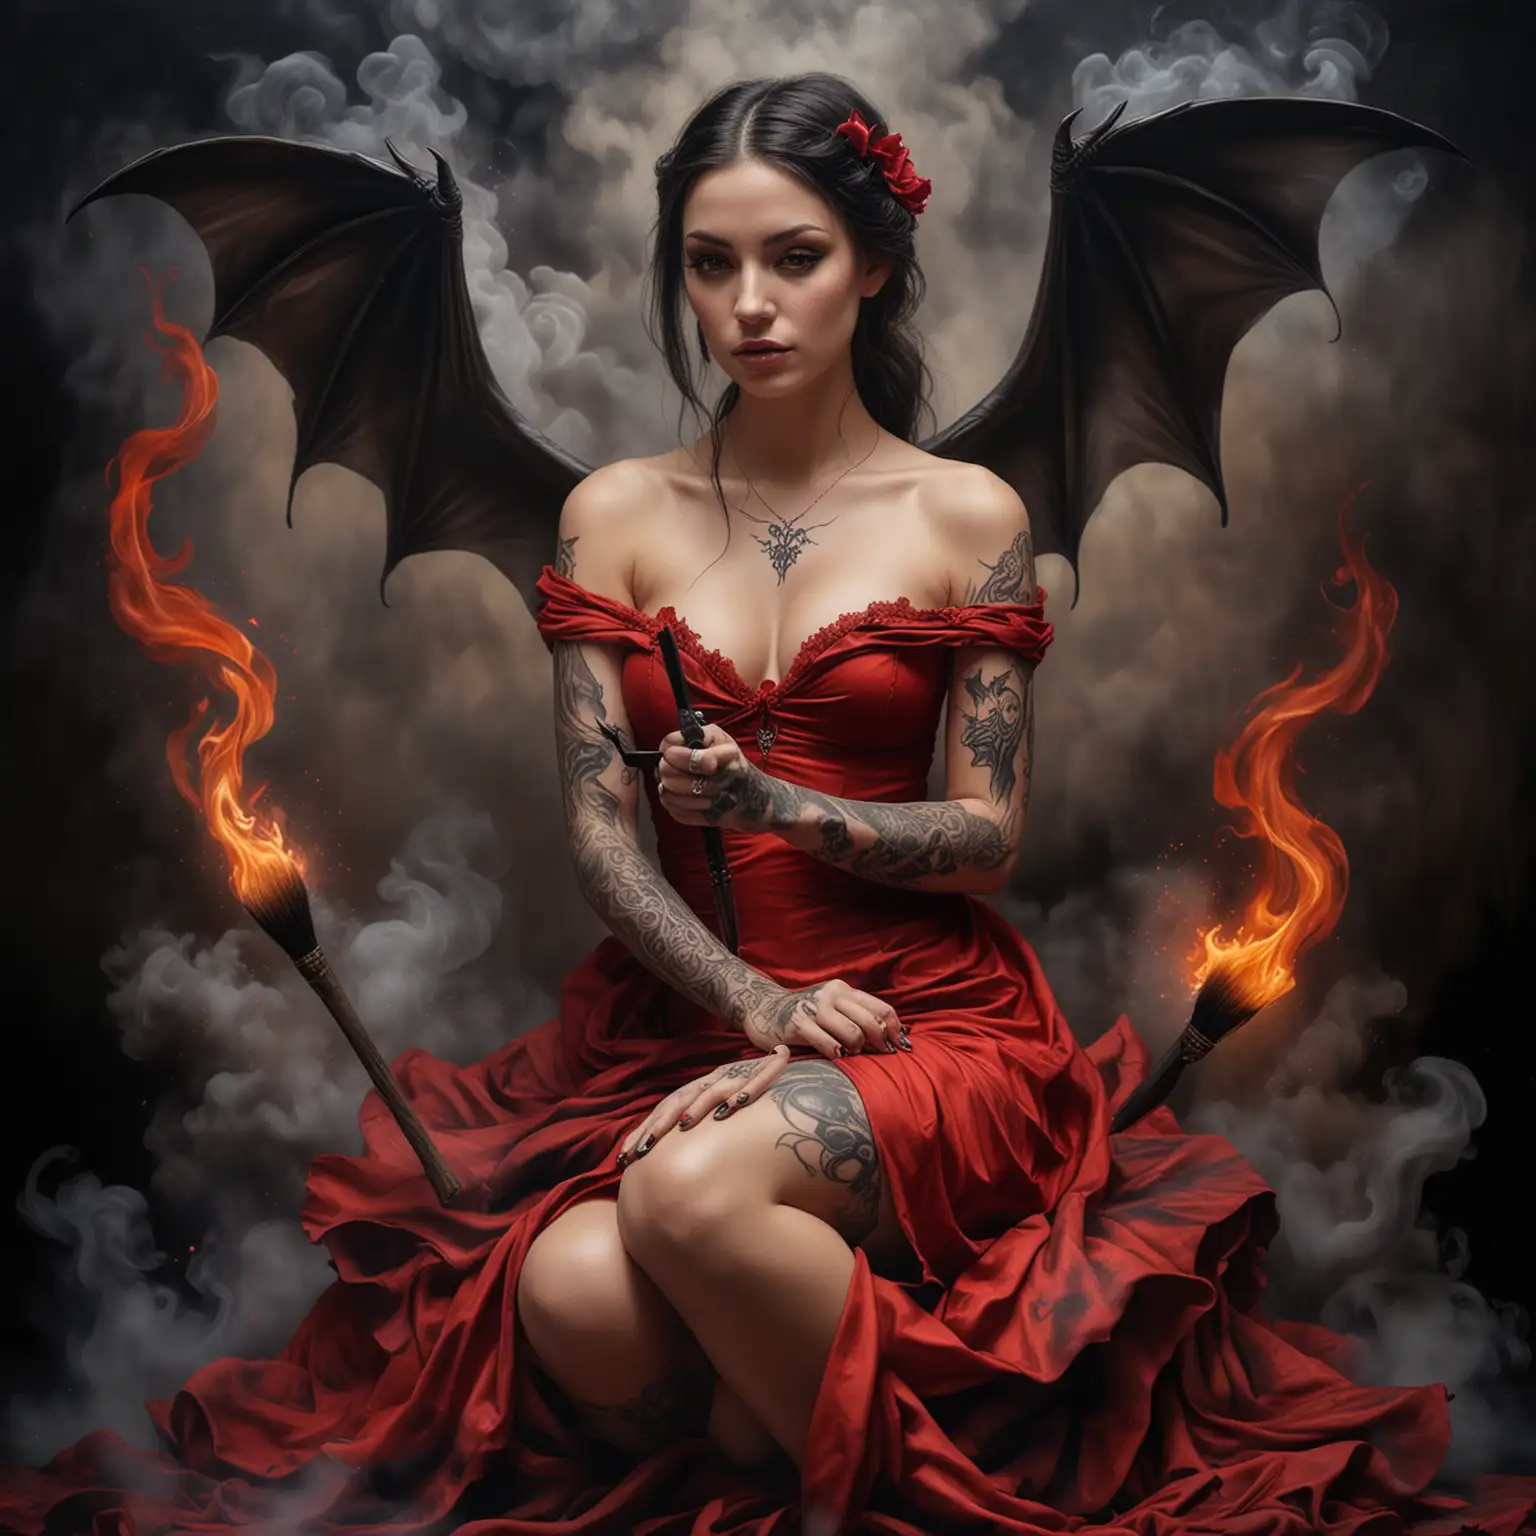 hyper realistic photography
a beautiful tattooed angel, She is a tattoo artist and wearing a red  dress while she has black bat wings, seated on cloud of smoke and flames While hold painting brush in her hand and performing a painting on canvas
good rendering 